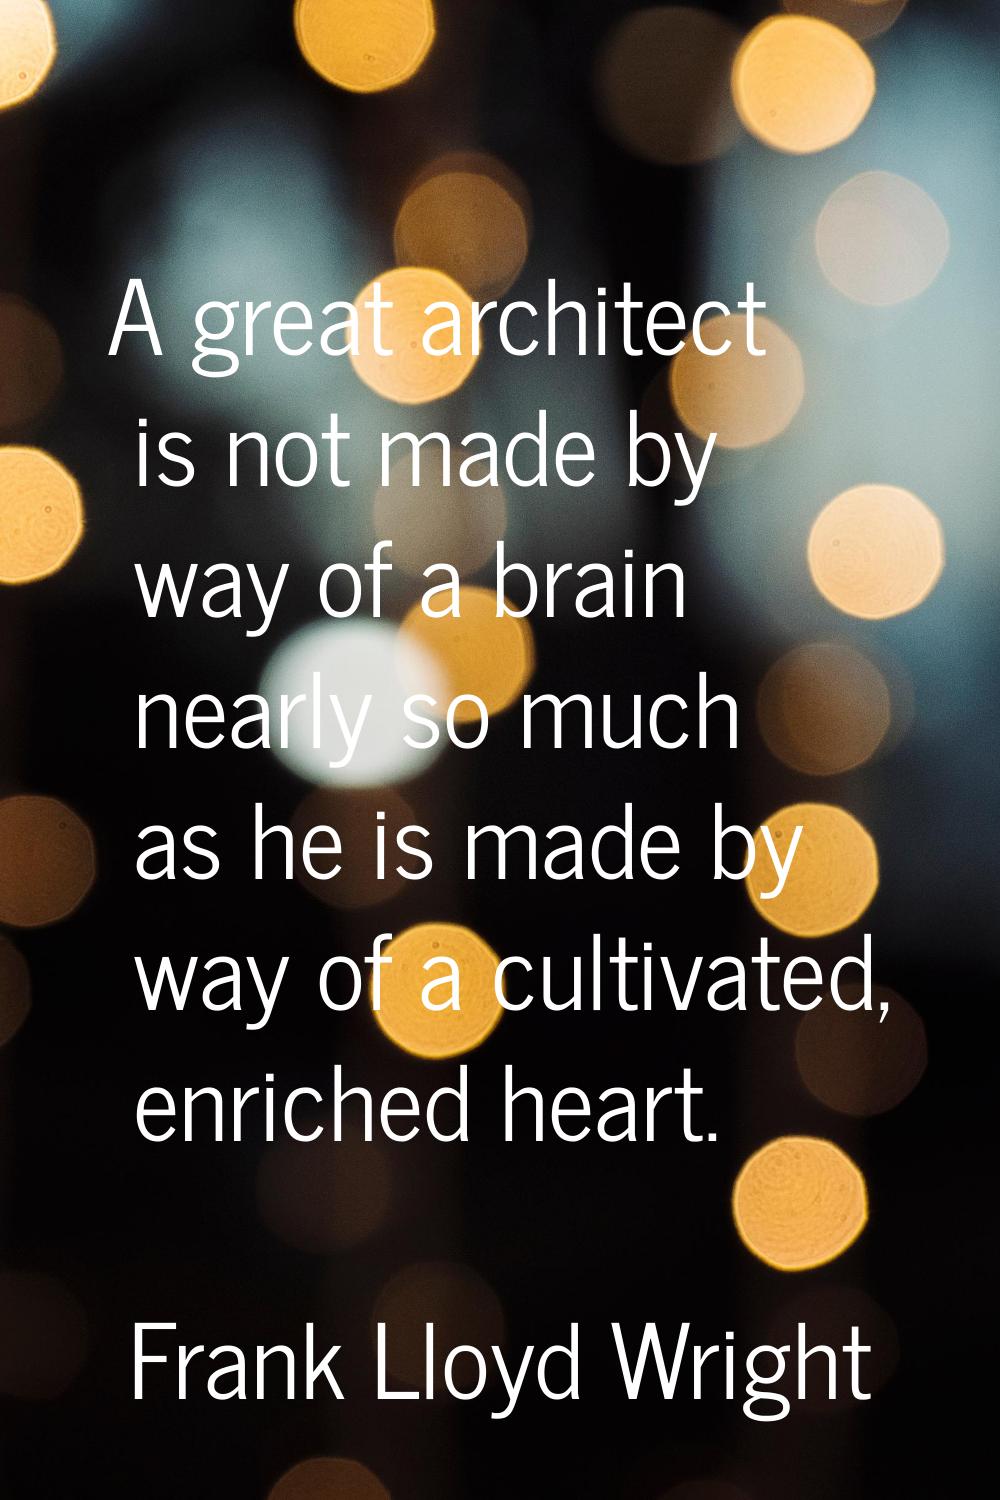 A great architect is not made by way of a brain nearly so much as he is made by way of a cultivated